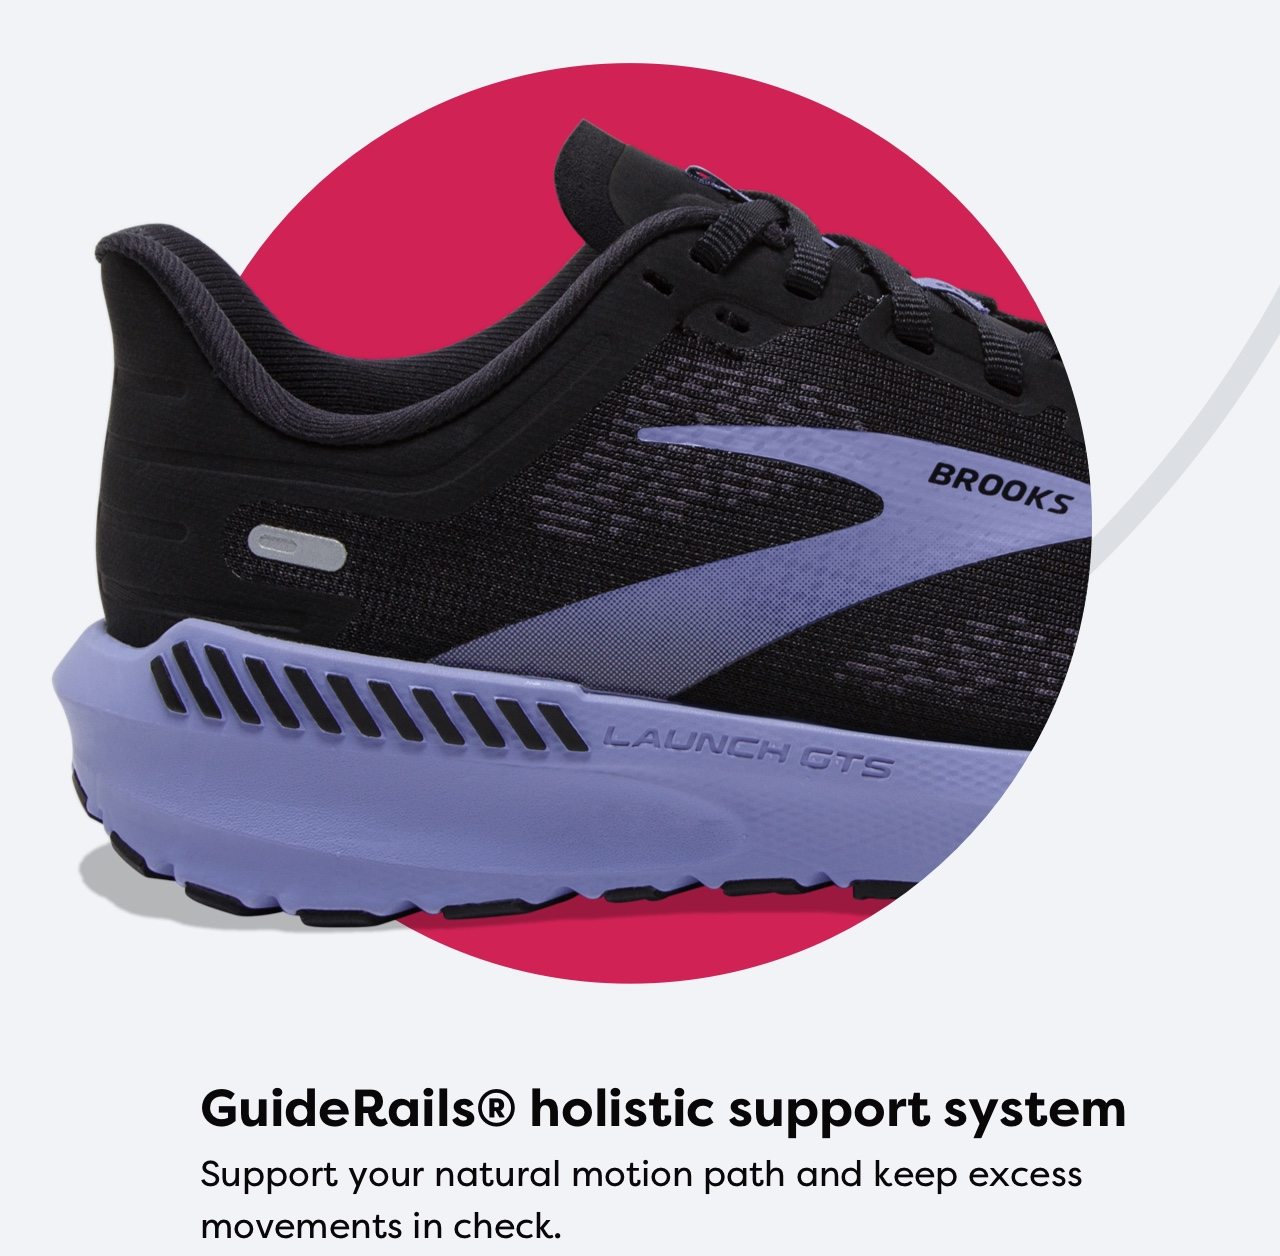 GuideRails® holistic support system | Support your natural motion path and keep excess movements in check.